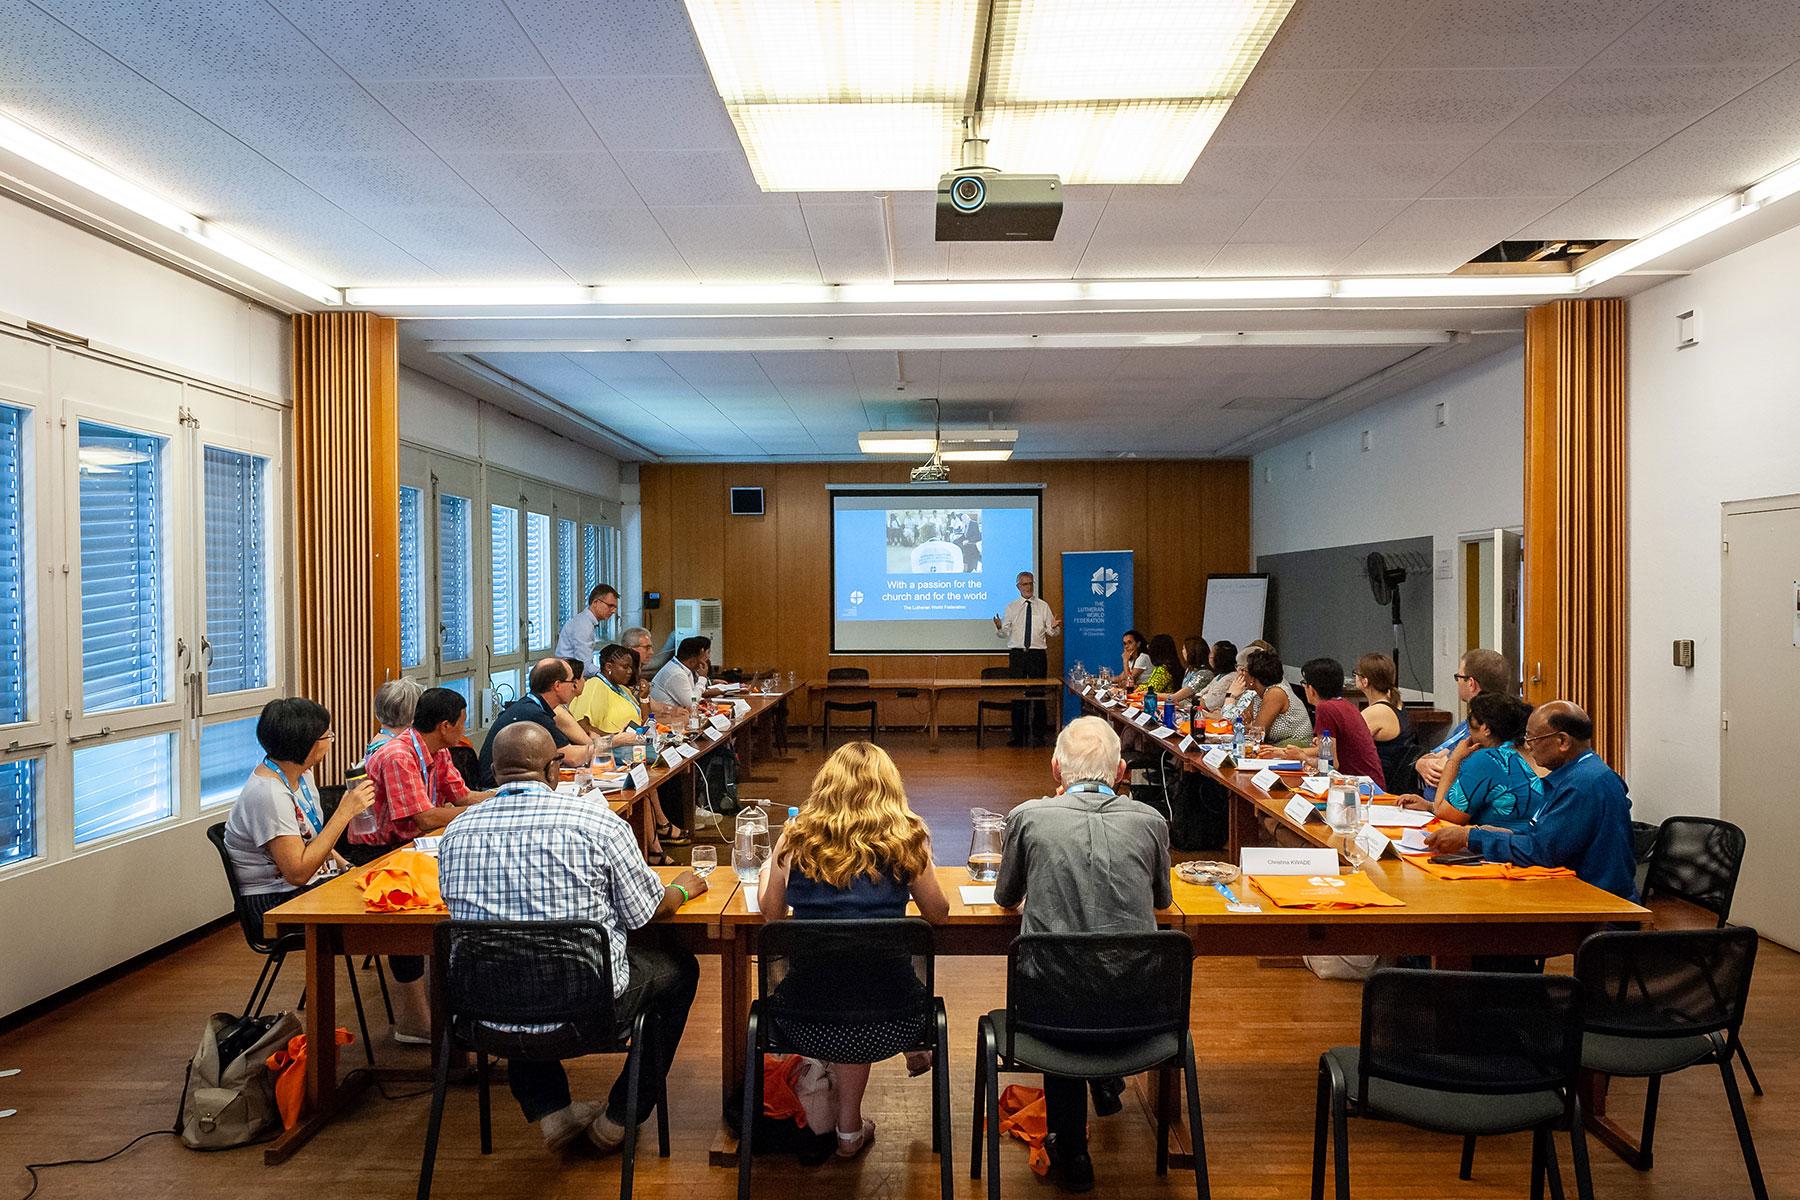 Participants in the 2019 LWF Third International Lay Leadersâ Seminar, held in Geneva and Wittenberg. Photo: LWF/S. Gallay